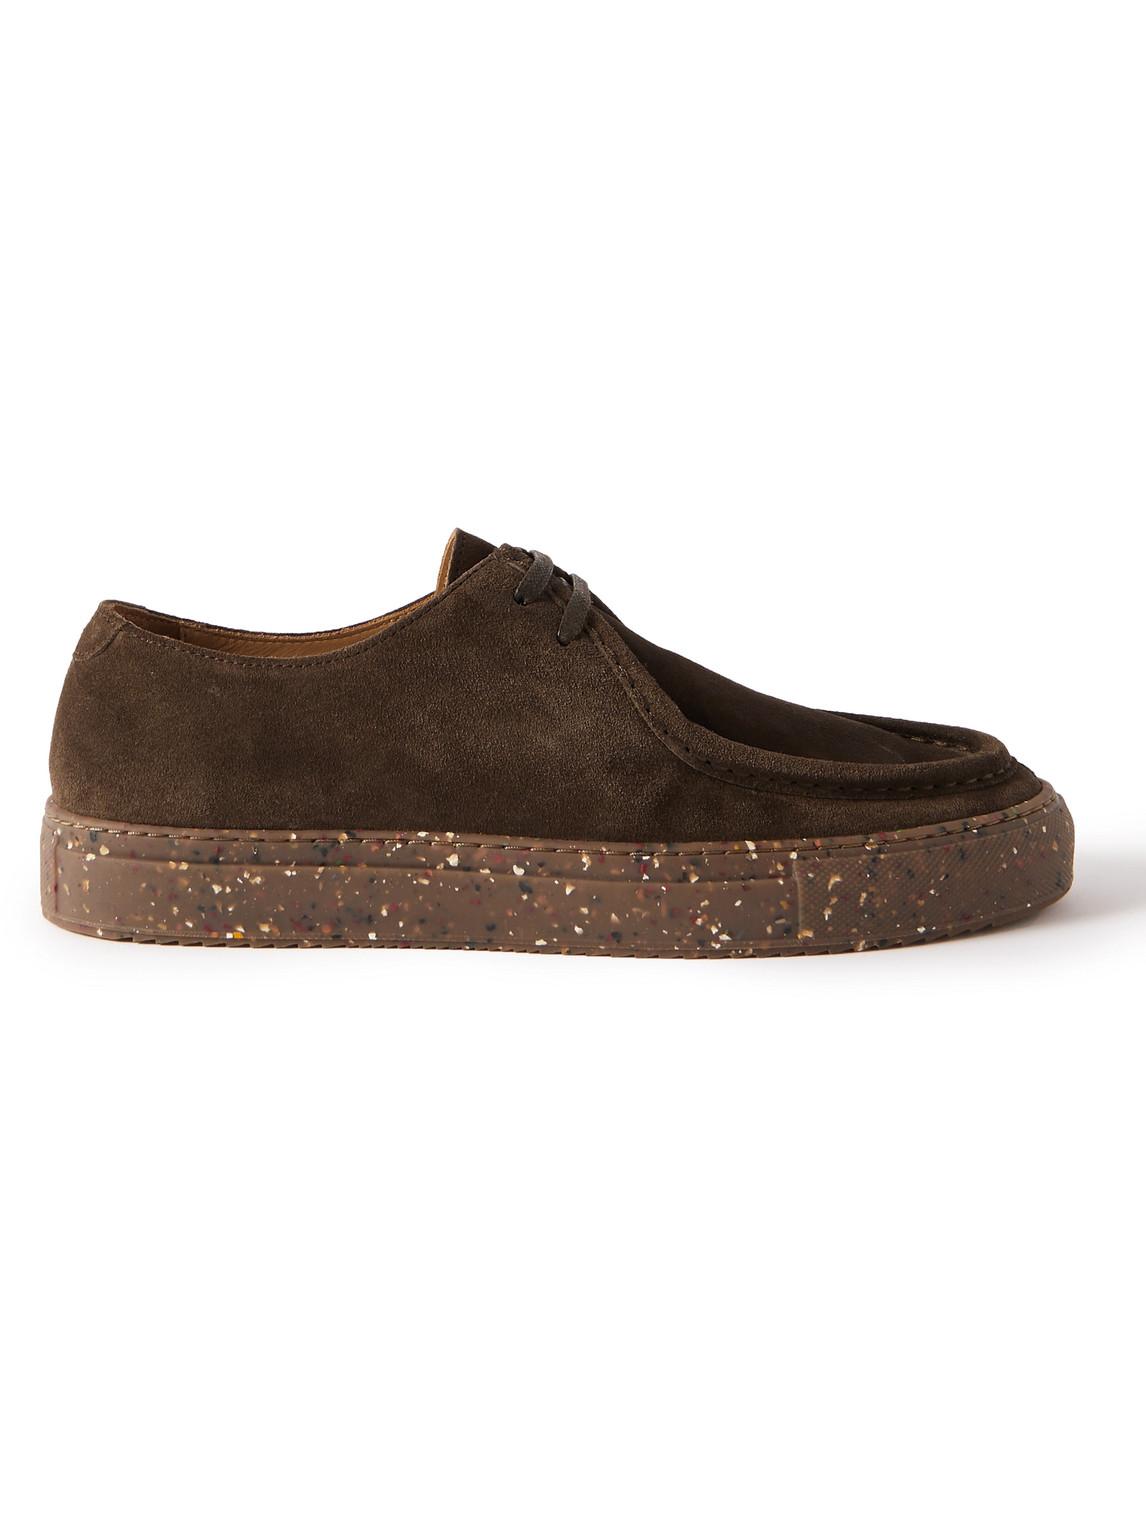 Mr P Larry Regenerated Suede By Evolo® Derby Shoes In Brown